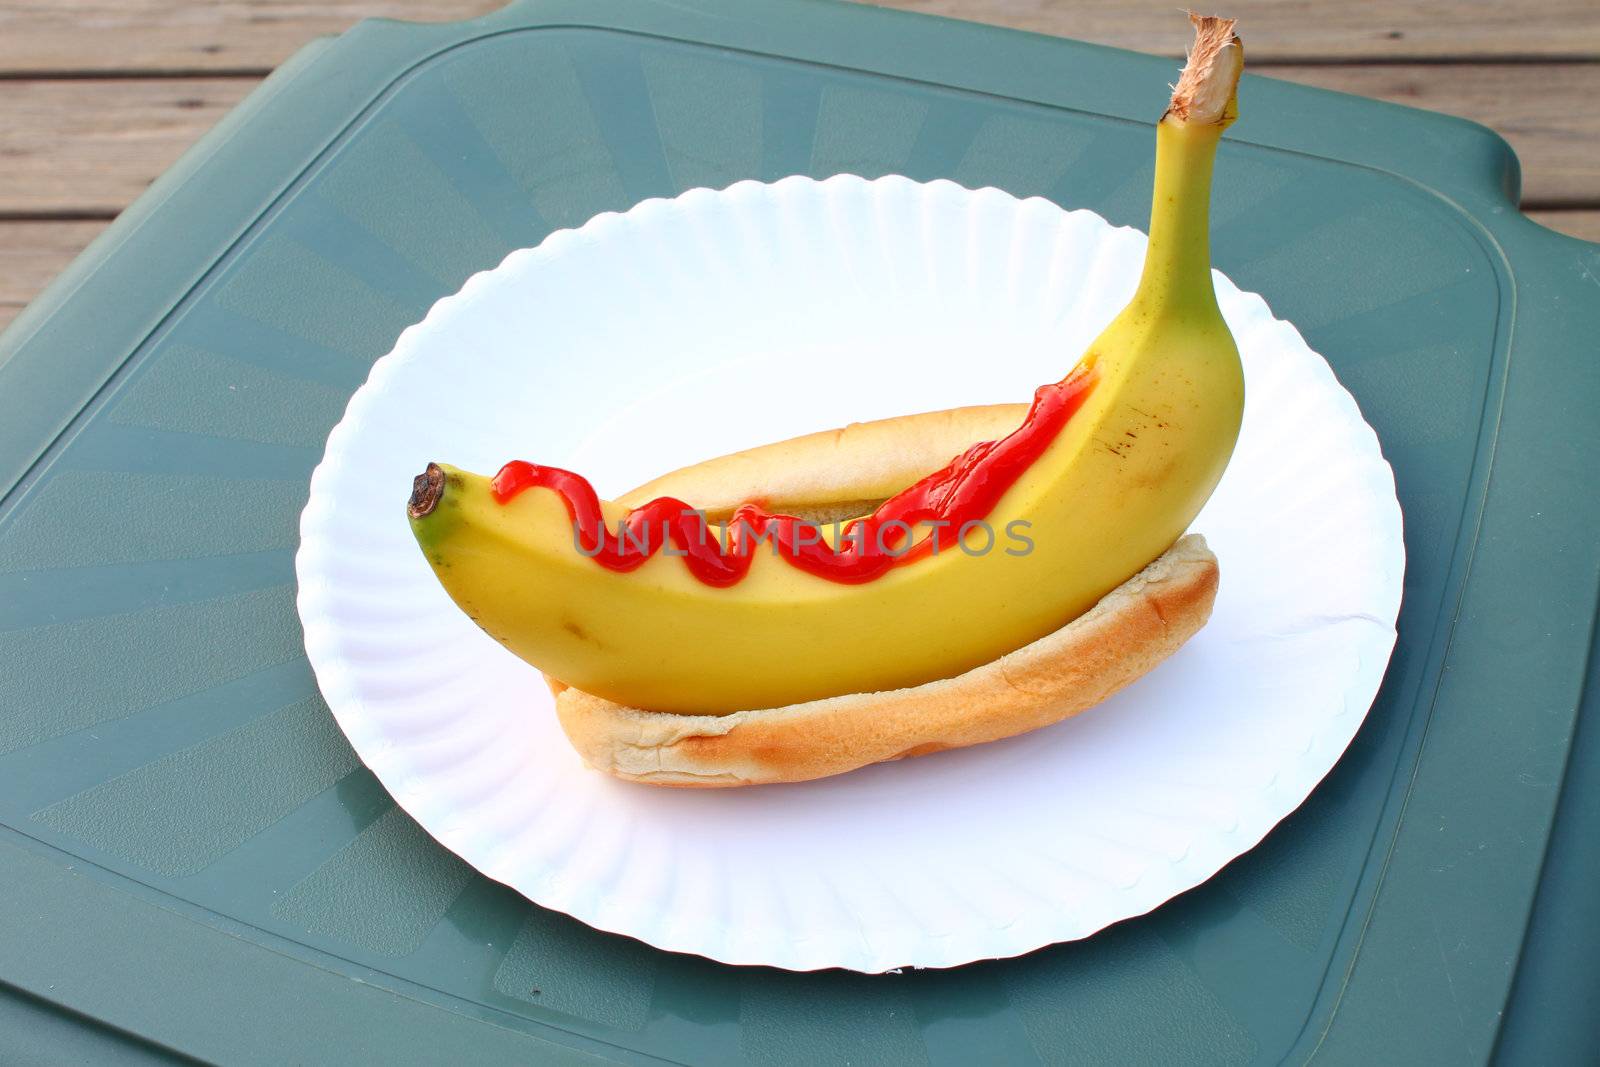 Banana dog with Ketchup by Wirepec